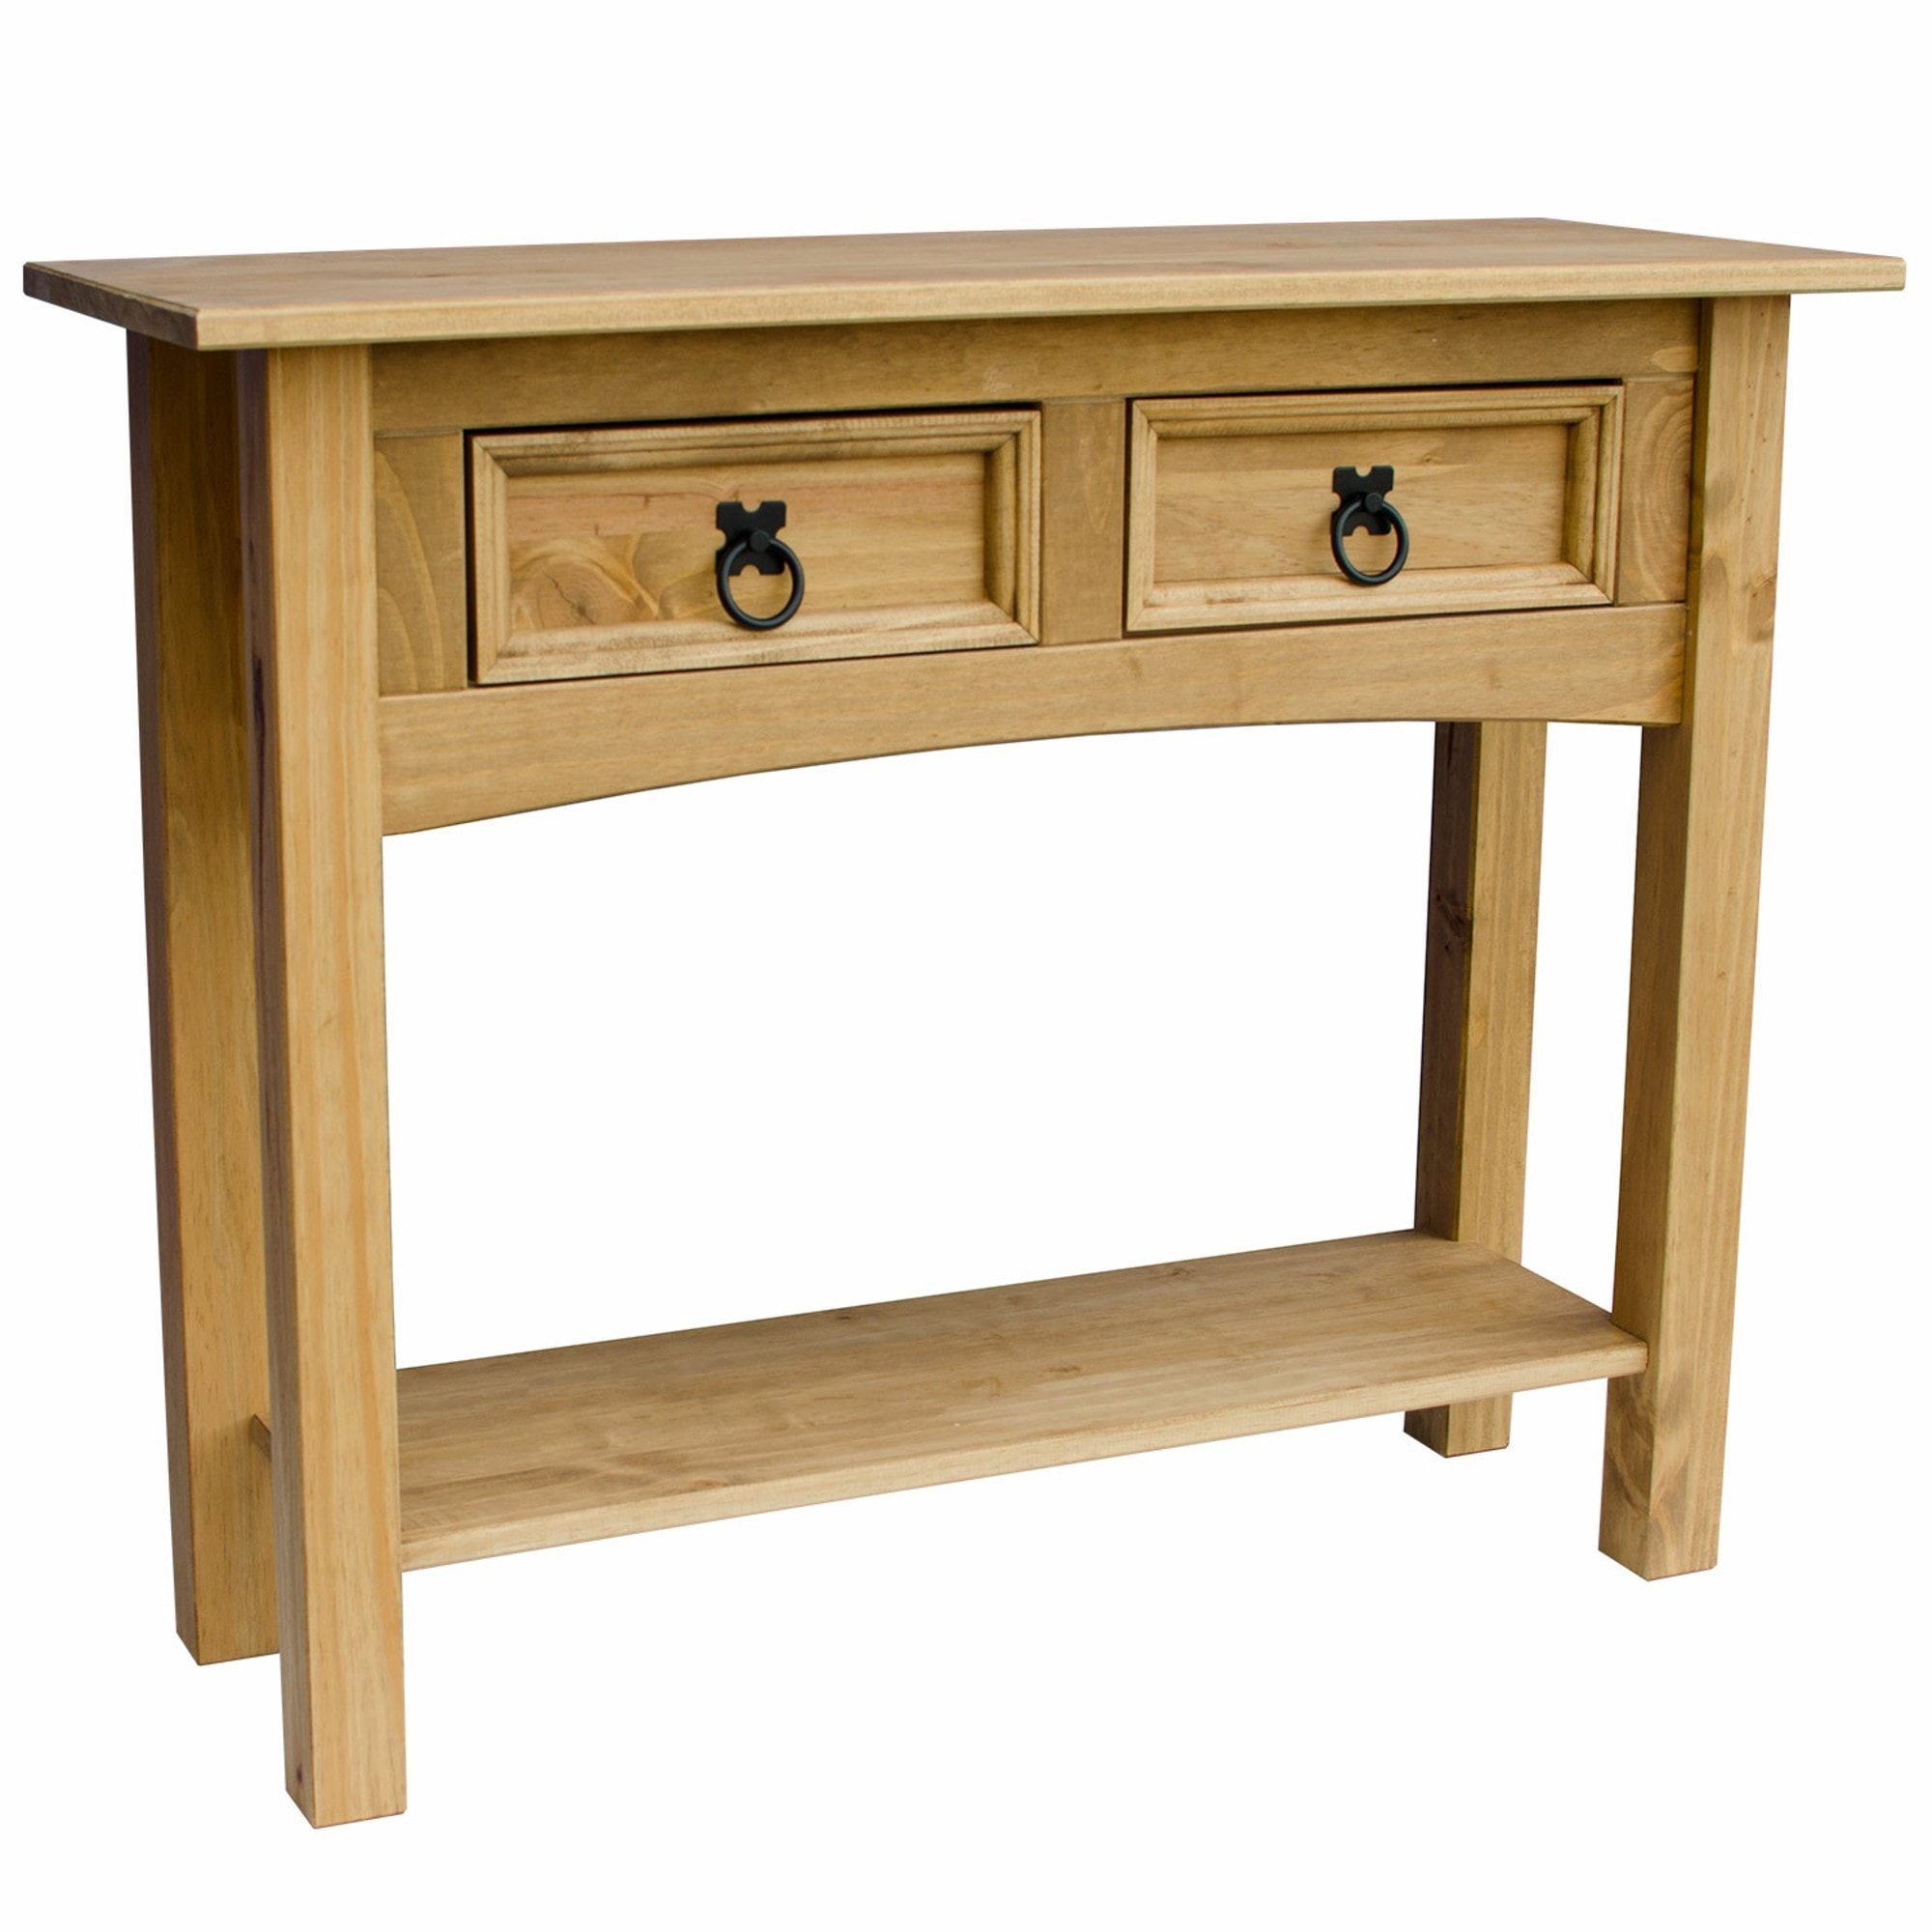 Corona 2 Drawer Console Table | Wood Furniture Intended For 2 Drawer Console Tables (Photo 1 of 20)